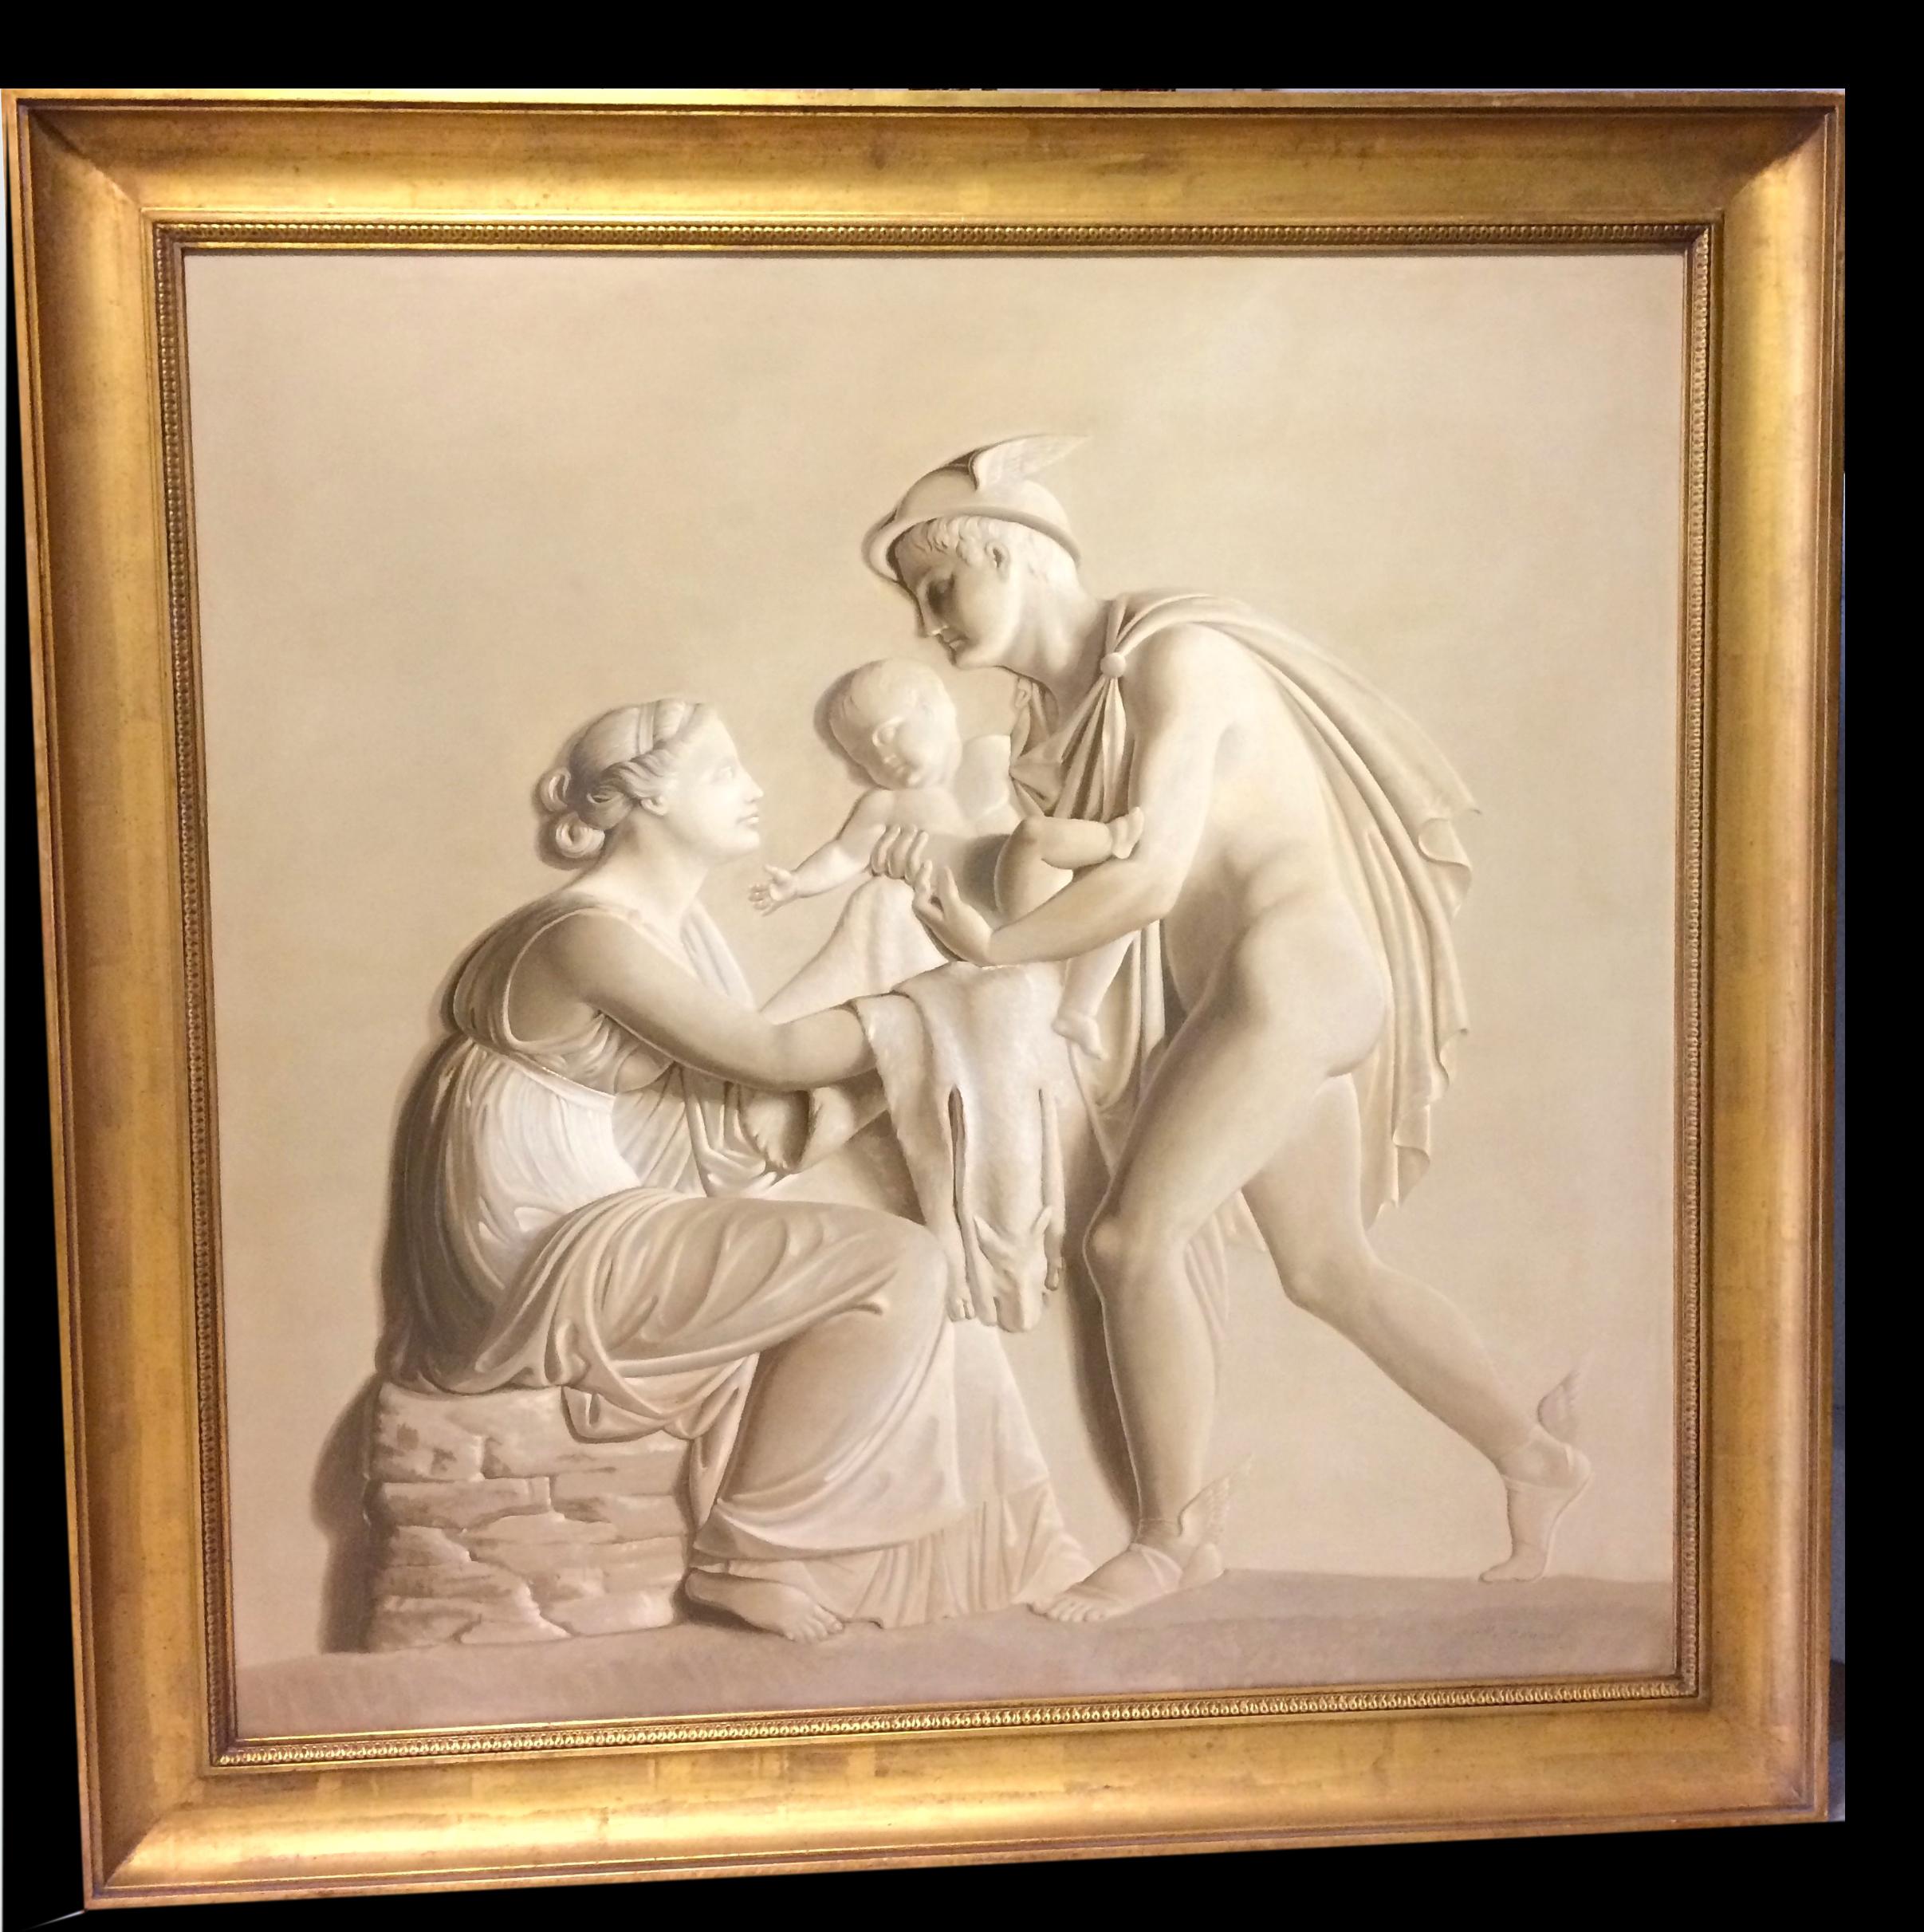 Early 20th century Italian Grisaille paintings, oil on wood after a famous Thorvaldsen reliefs.
Mythological scene with a finely carved and gilt- wood frame.
- Cupid complains to Venus about a bee sting.
- Mercury Brings Bacchus to